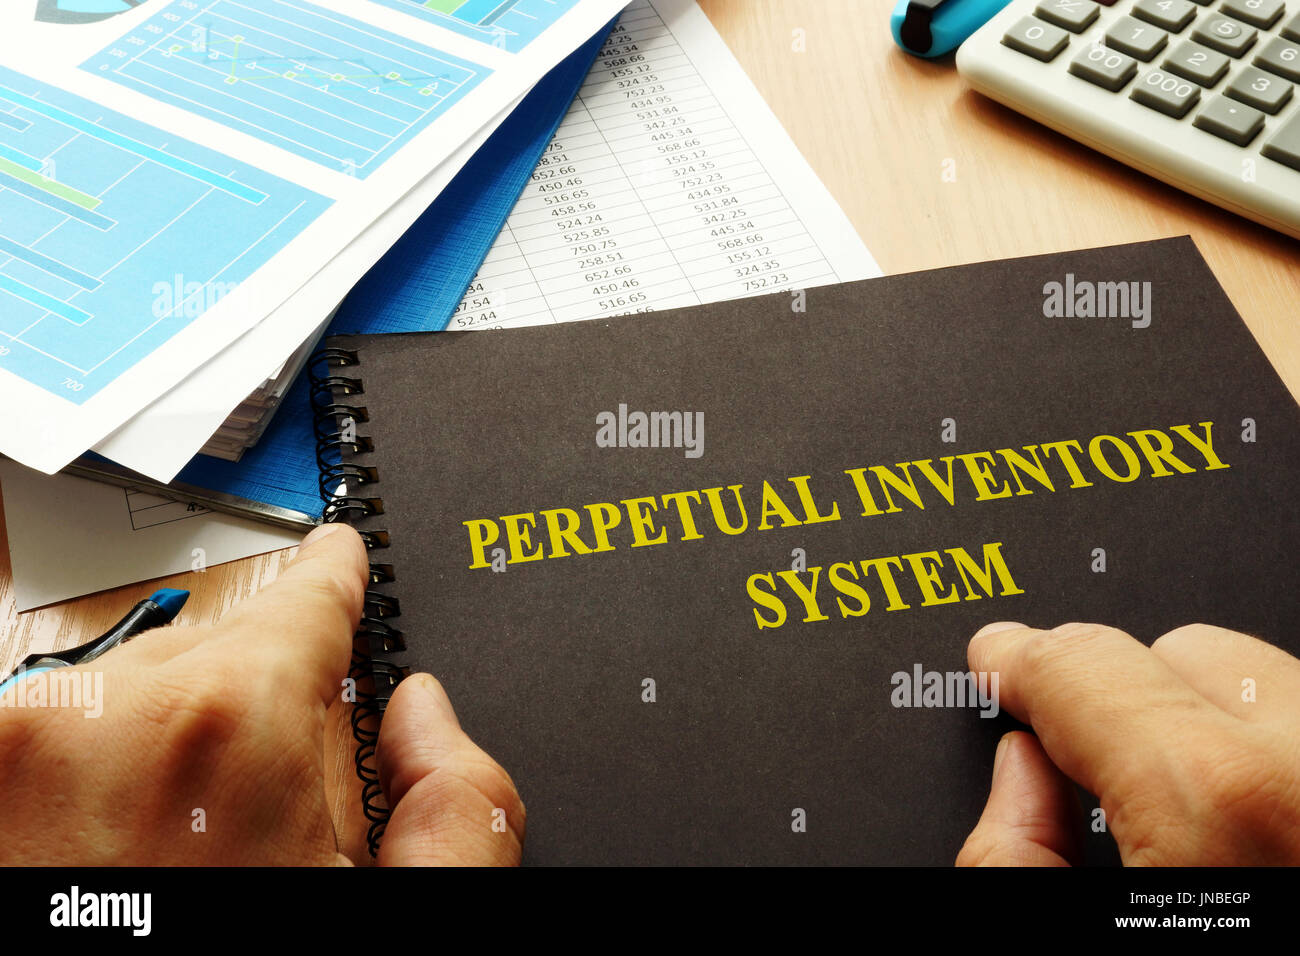 Buch mit Namen "Perpetual-inventory-System. Stockfoto